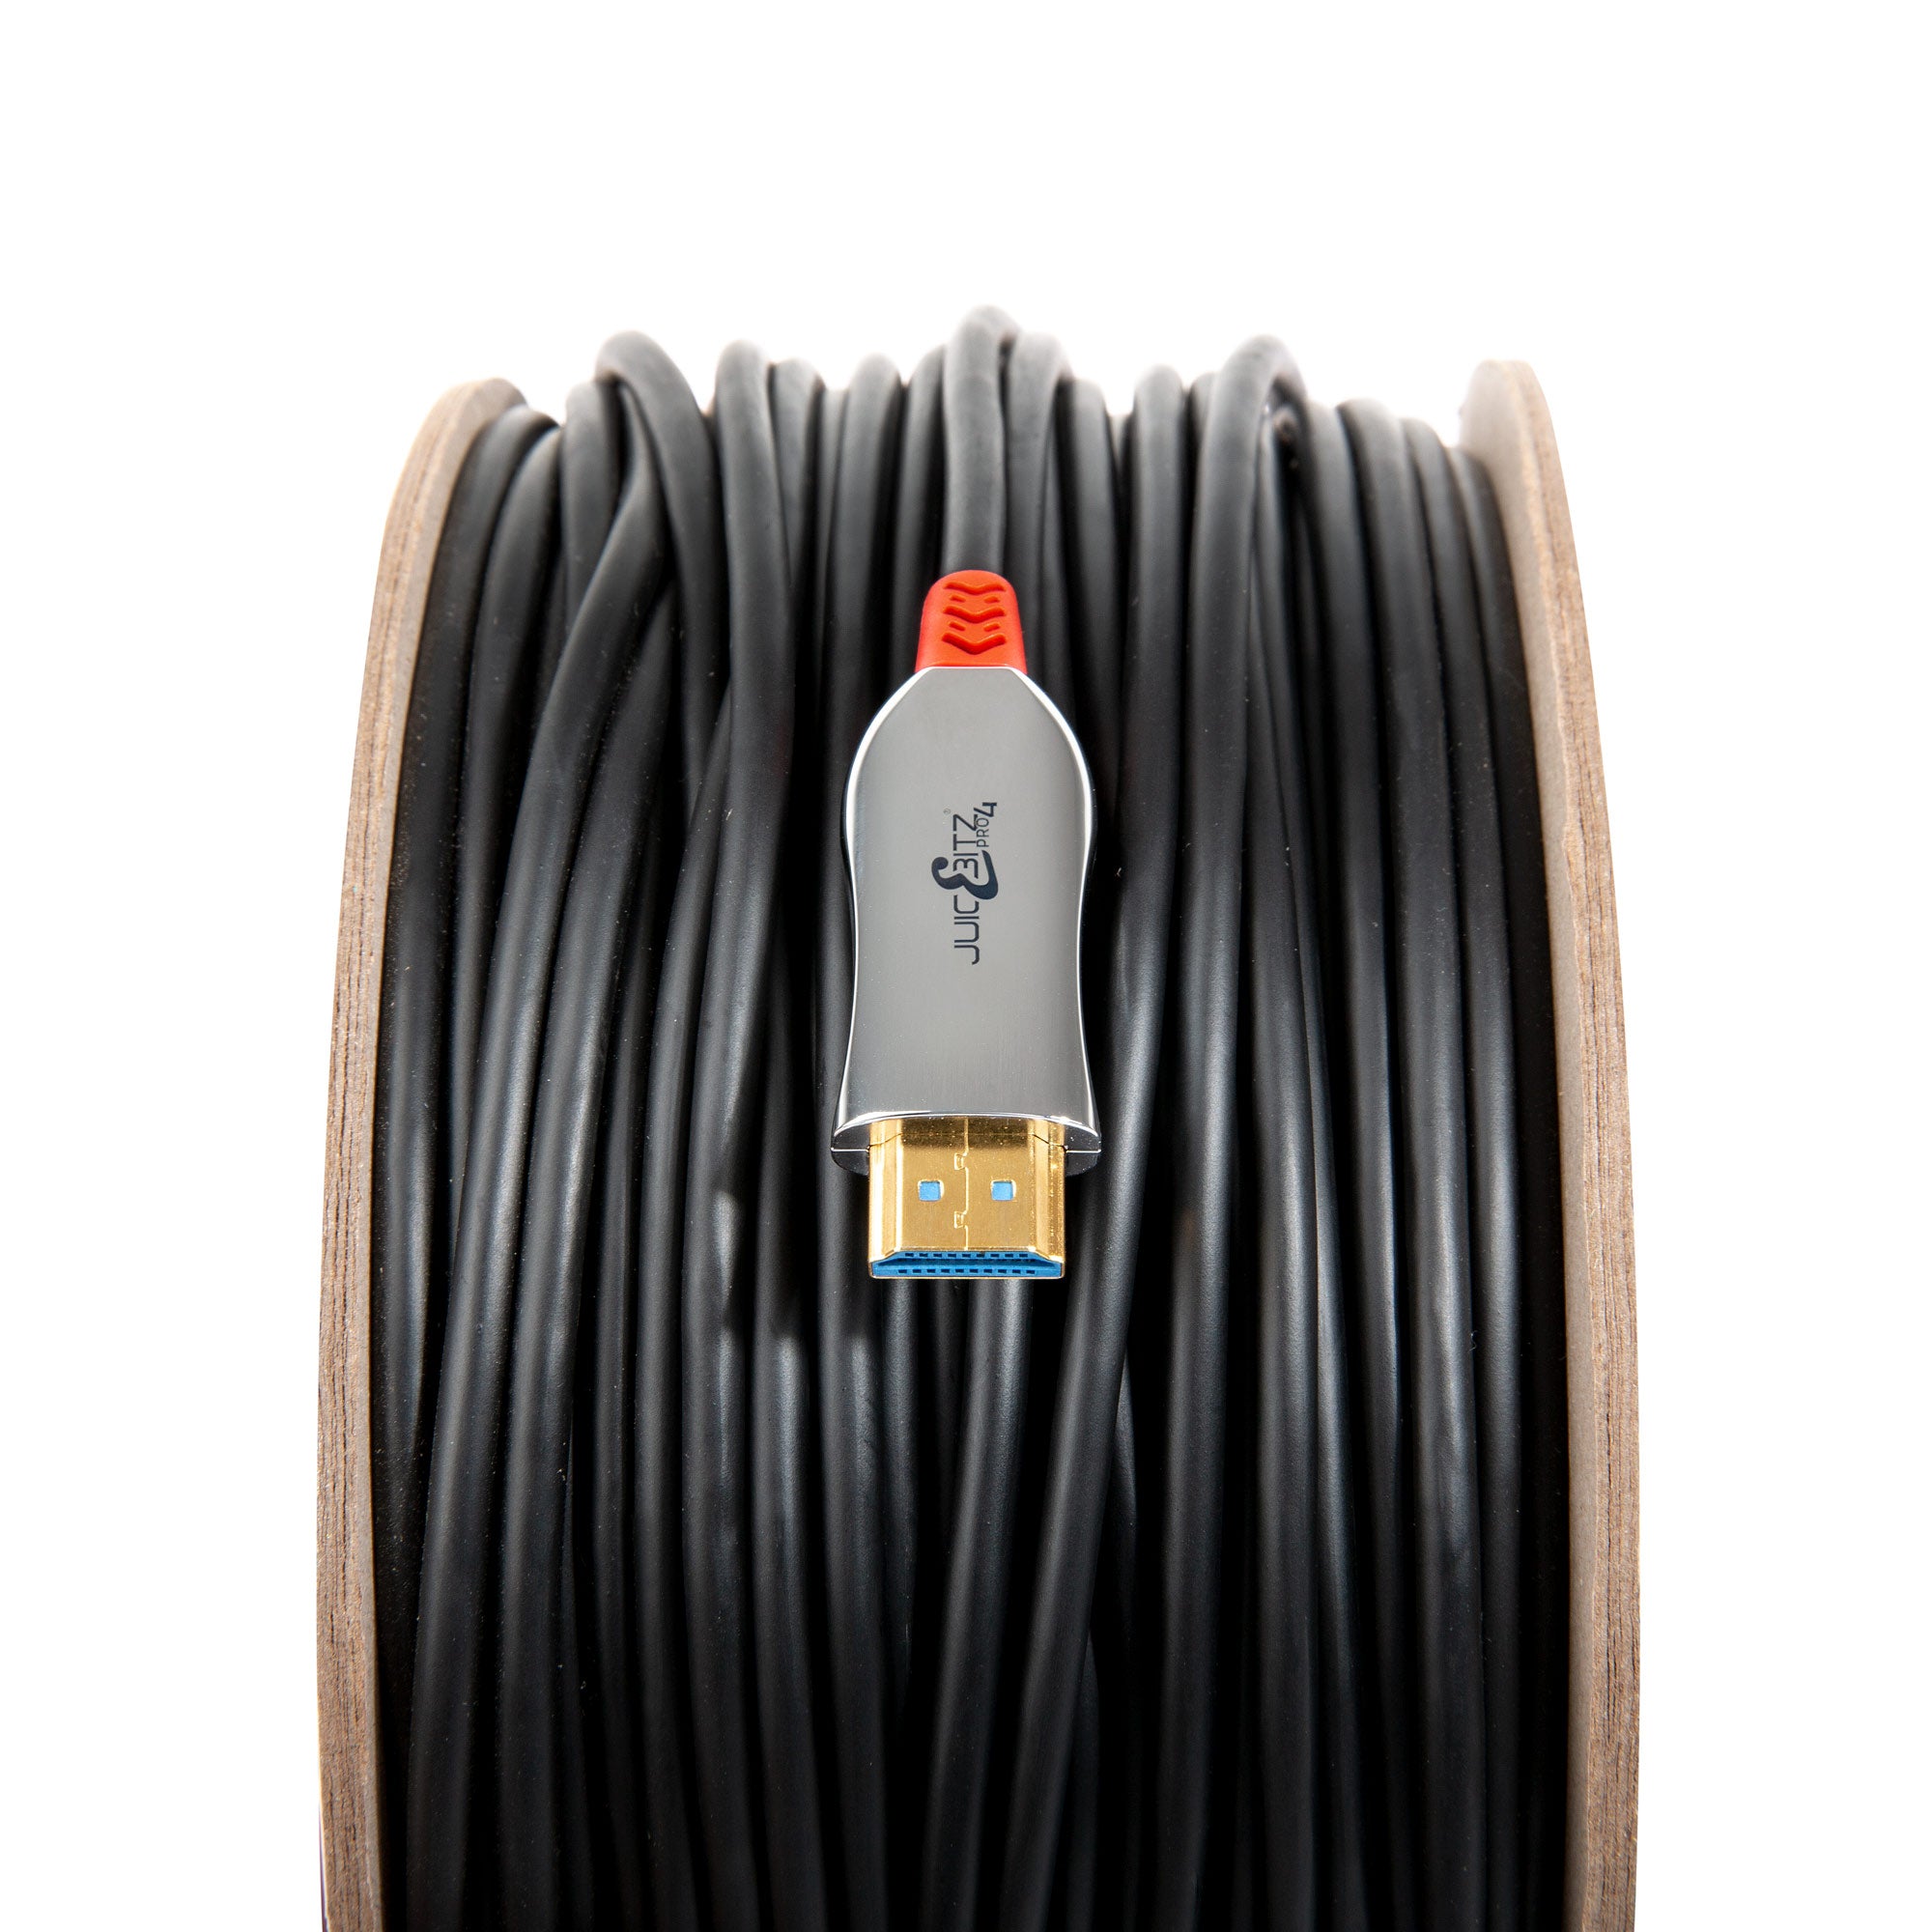 PRO Series 4k Fibre Optic HDMI Cable Lead Ultra High Speed 18Gbps v2.0b AOC Cord